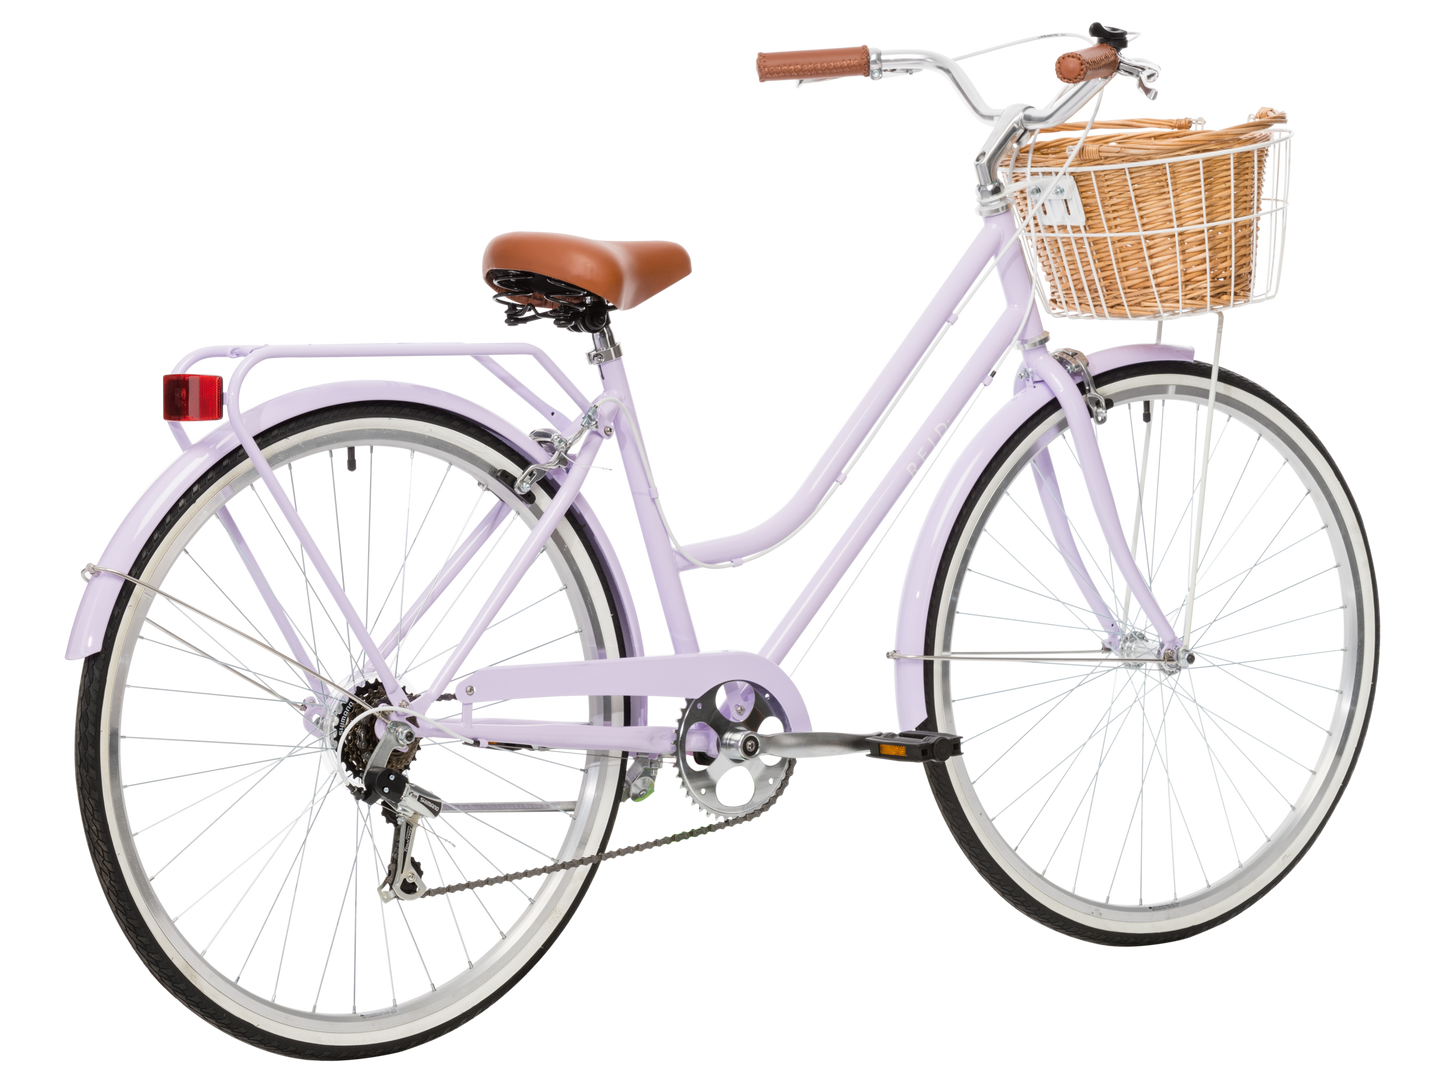 Ladies Classic Plus Vintage Bike in Lavender featuring rear pannier rack and red reflector from Reid Cycles Australia